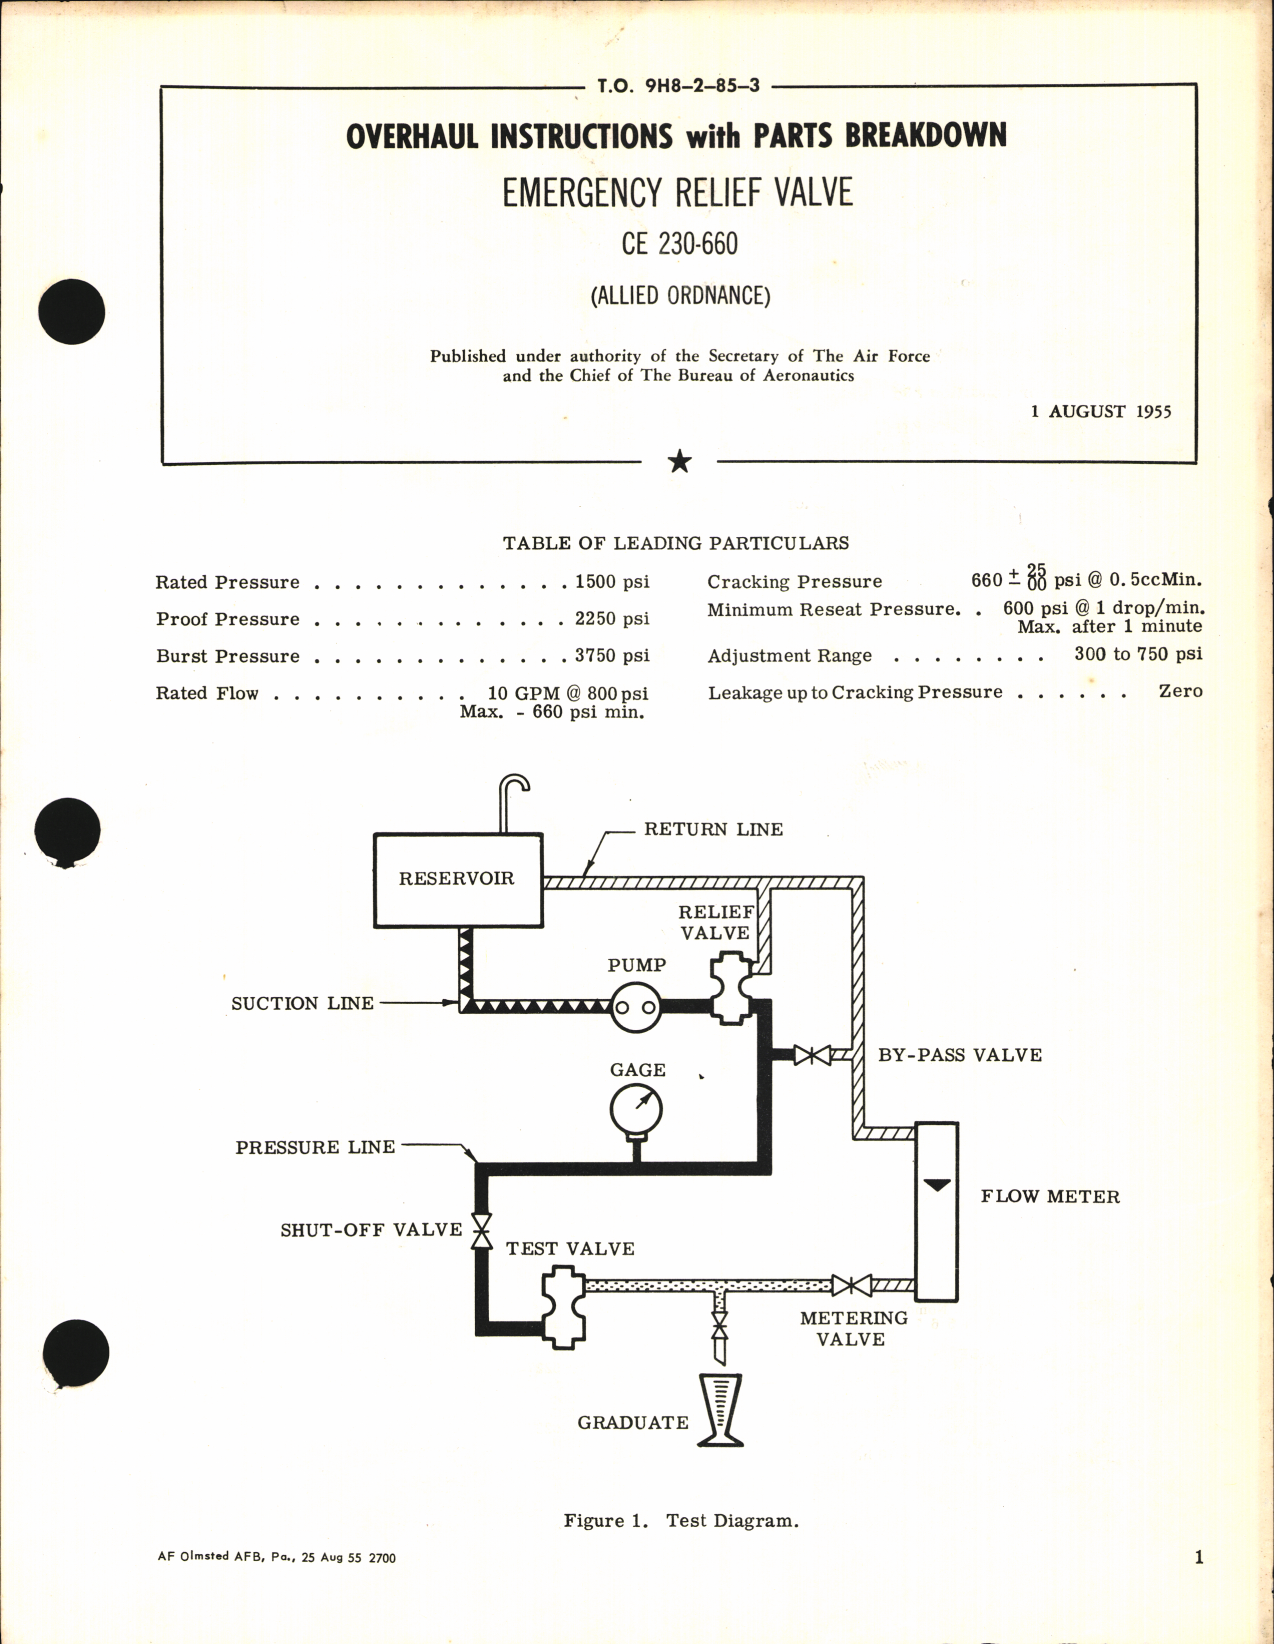 Sample page 1 from AirCorps Library document: Overhaul Instructions with Parts Breakdown for Emergency Relief Valve CE 230-660